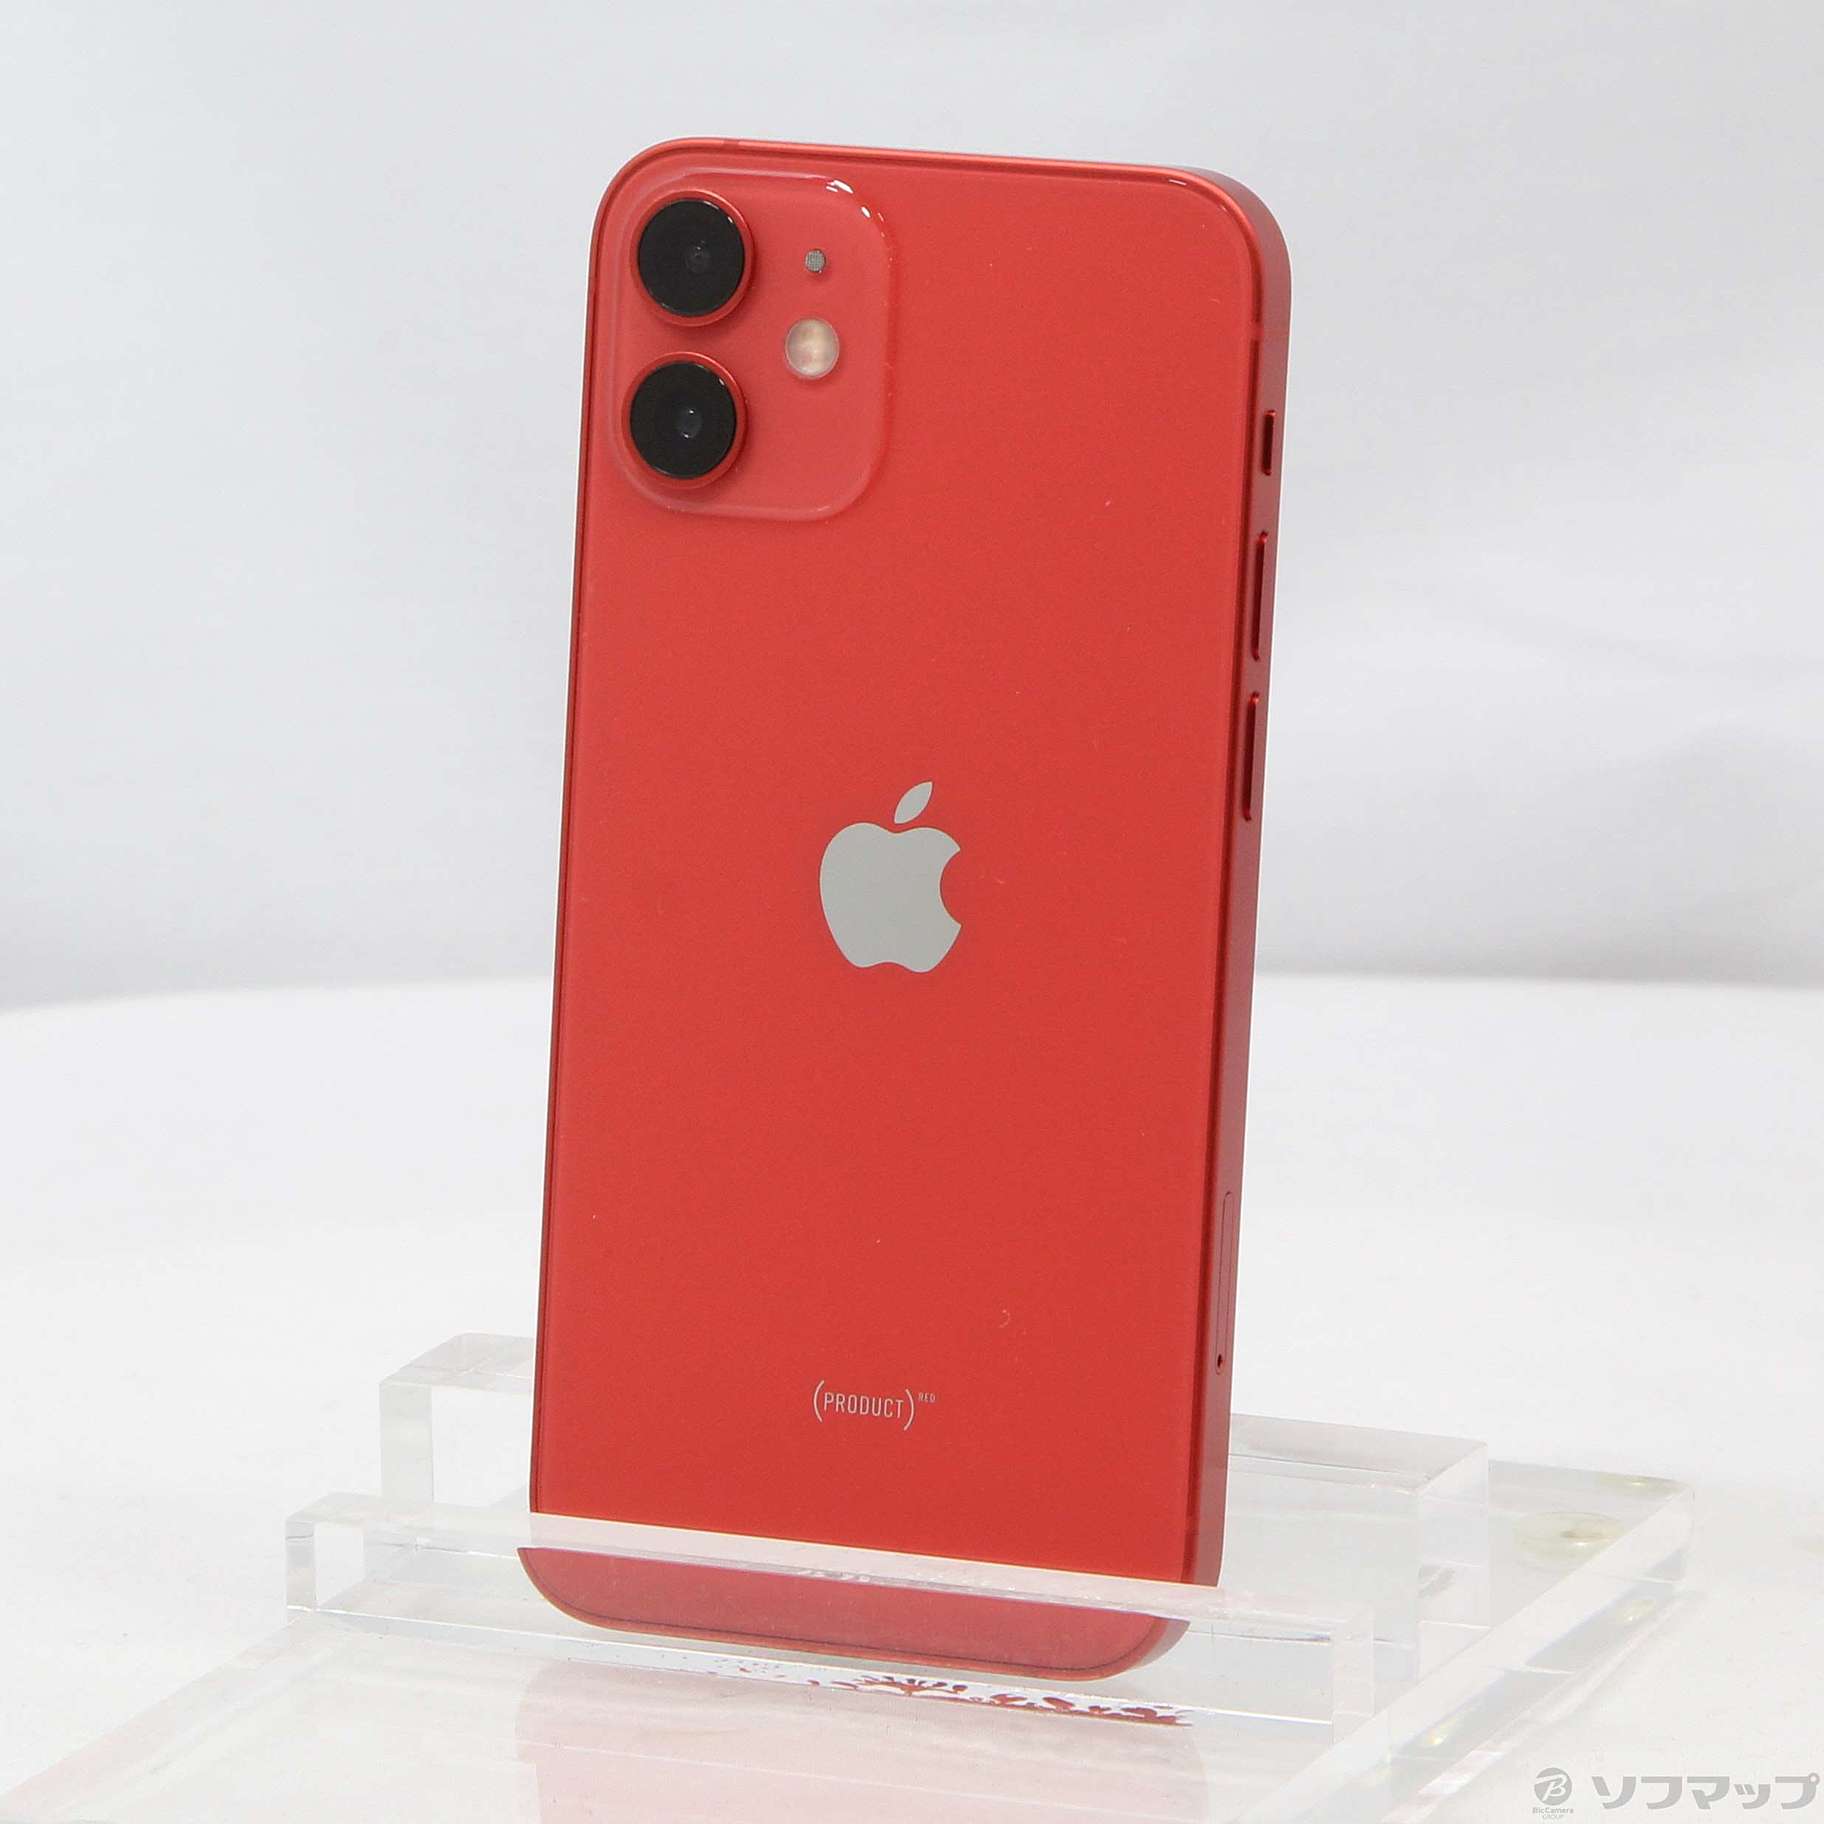 iPhone12 256GB RED